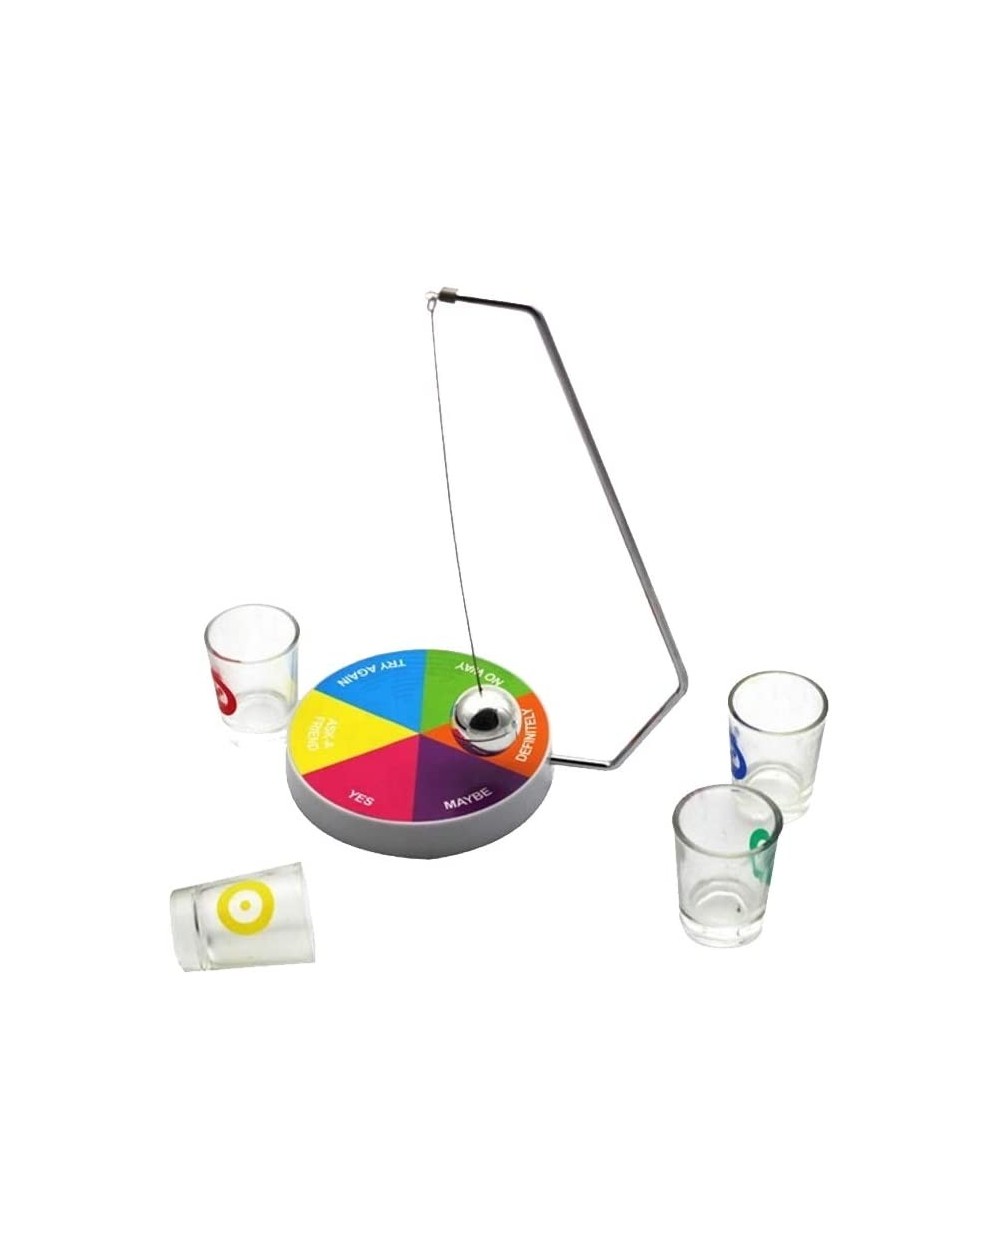 Party Games & Activities Decision Maker Drinking Game Party - C319E5QD3MX $30.81